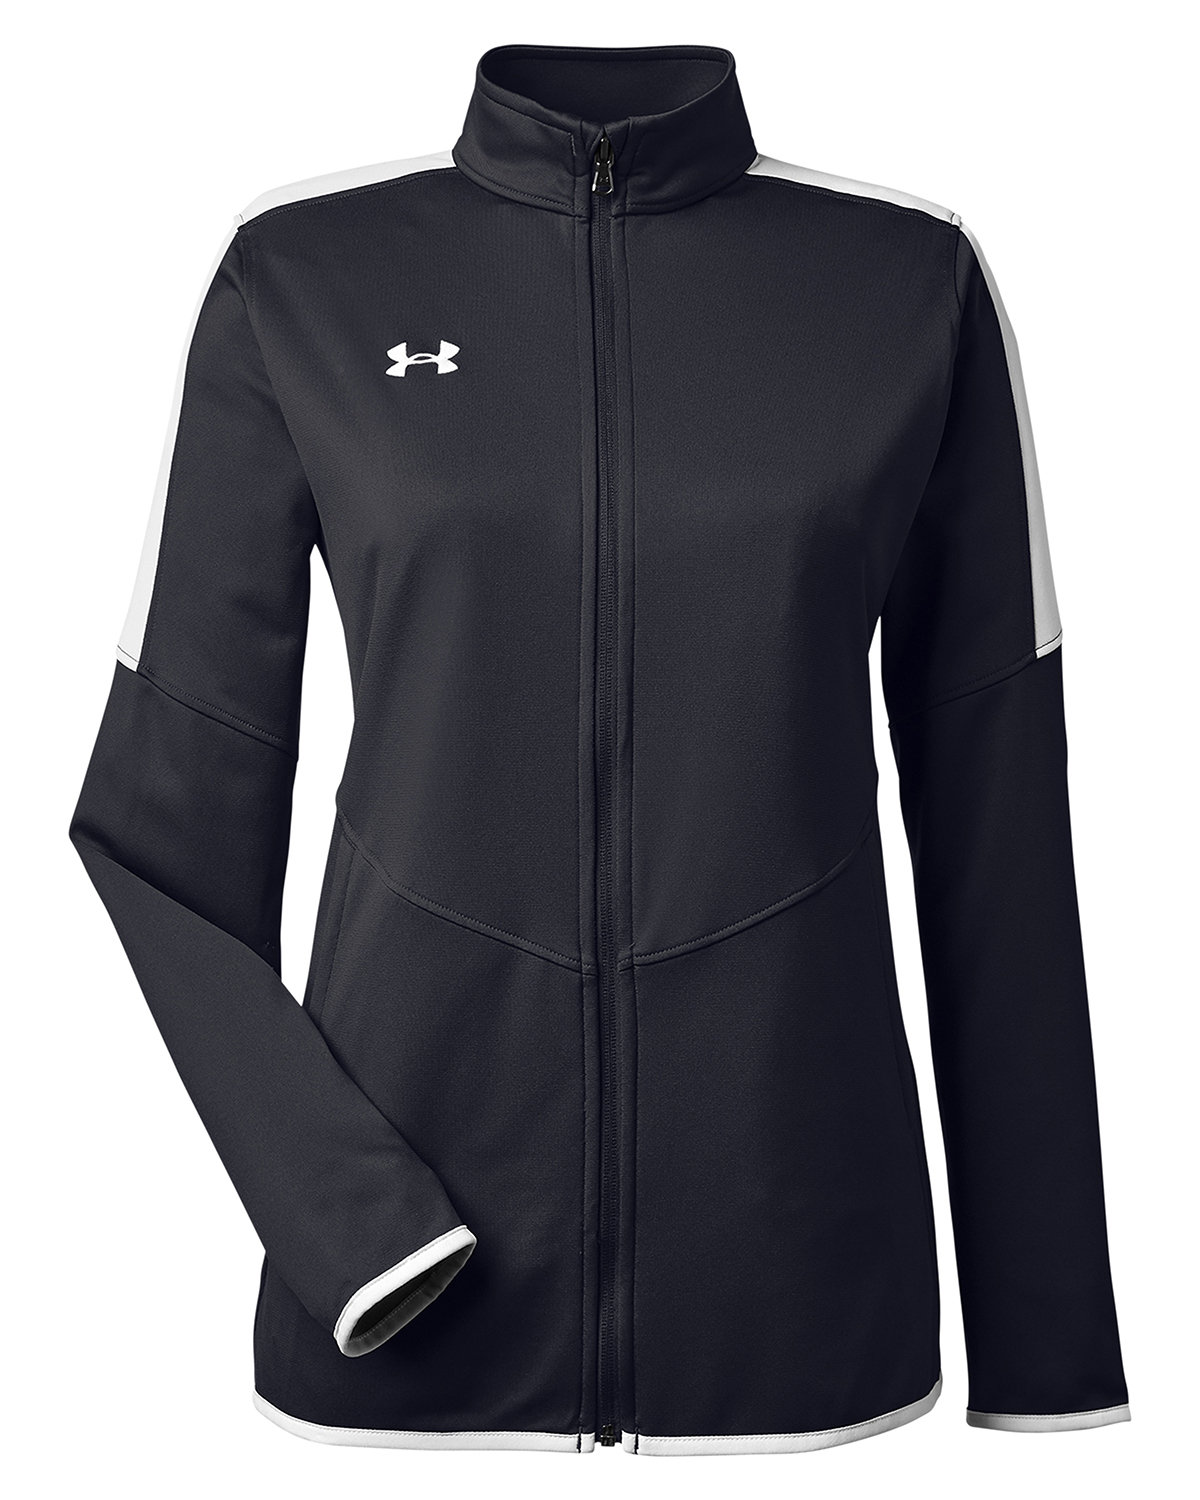 Branded Under Armour Ladies’ Rival Knit Jacket Black